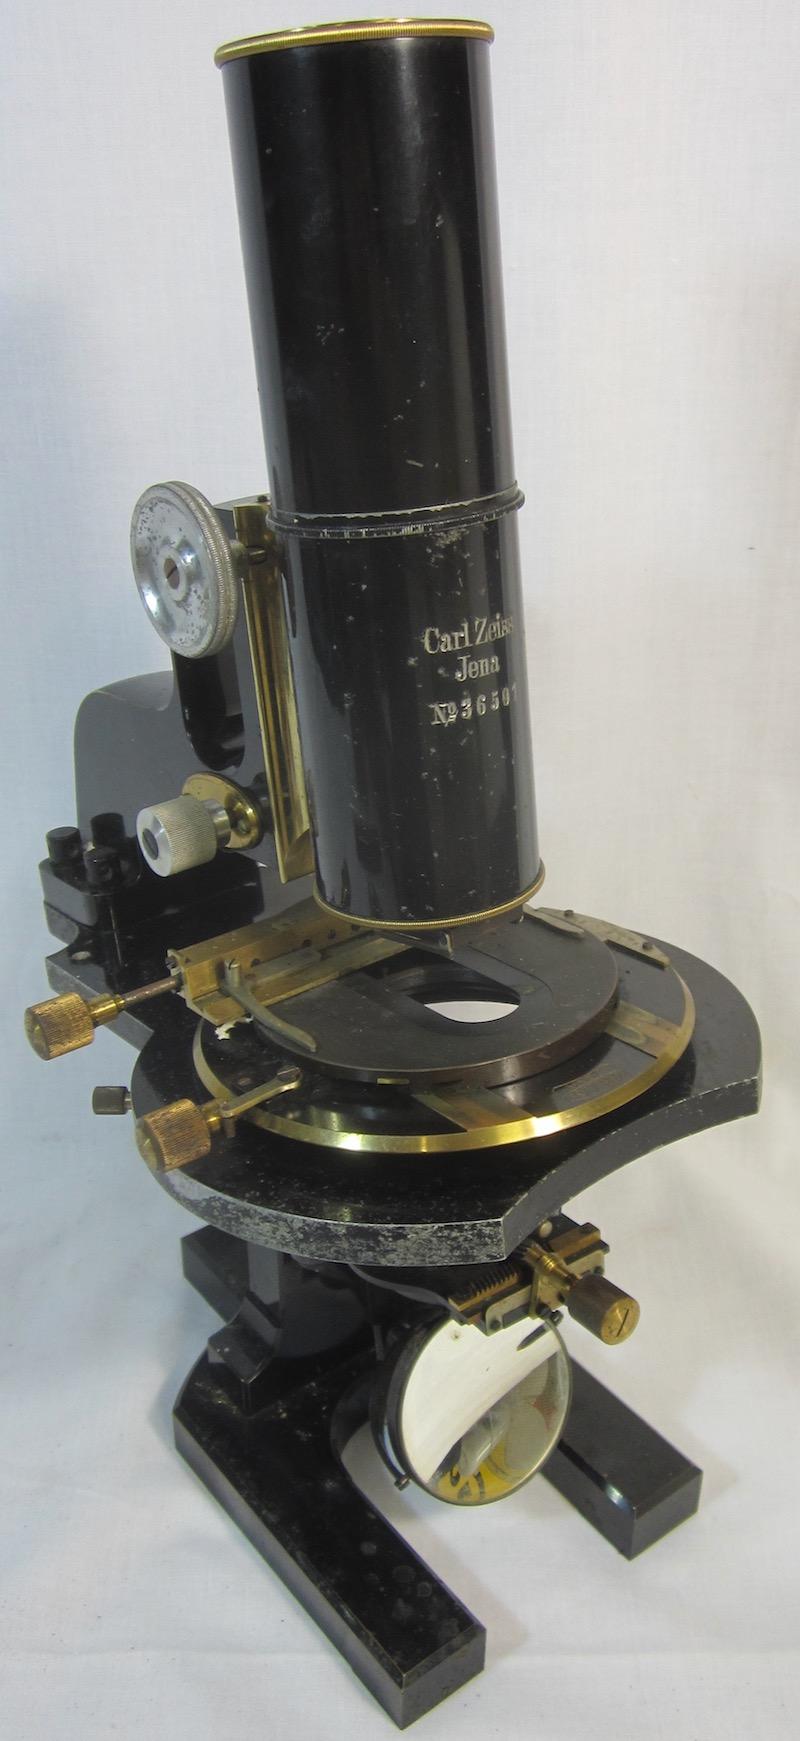 Carl Zeiss Laboratory Microscope In Good Condition In Paradise Point, Queensland